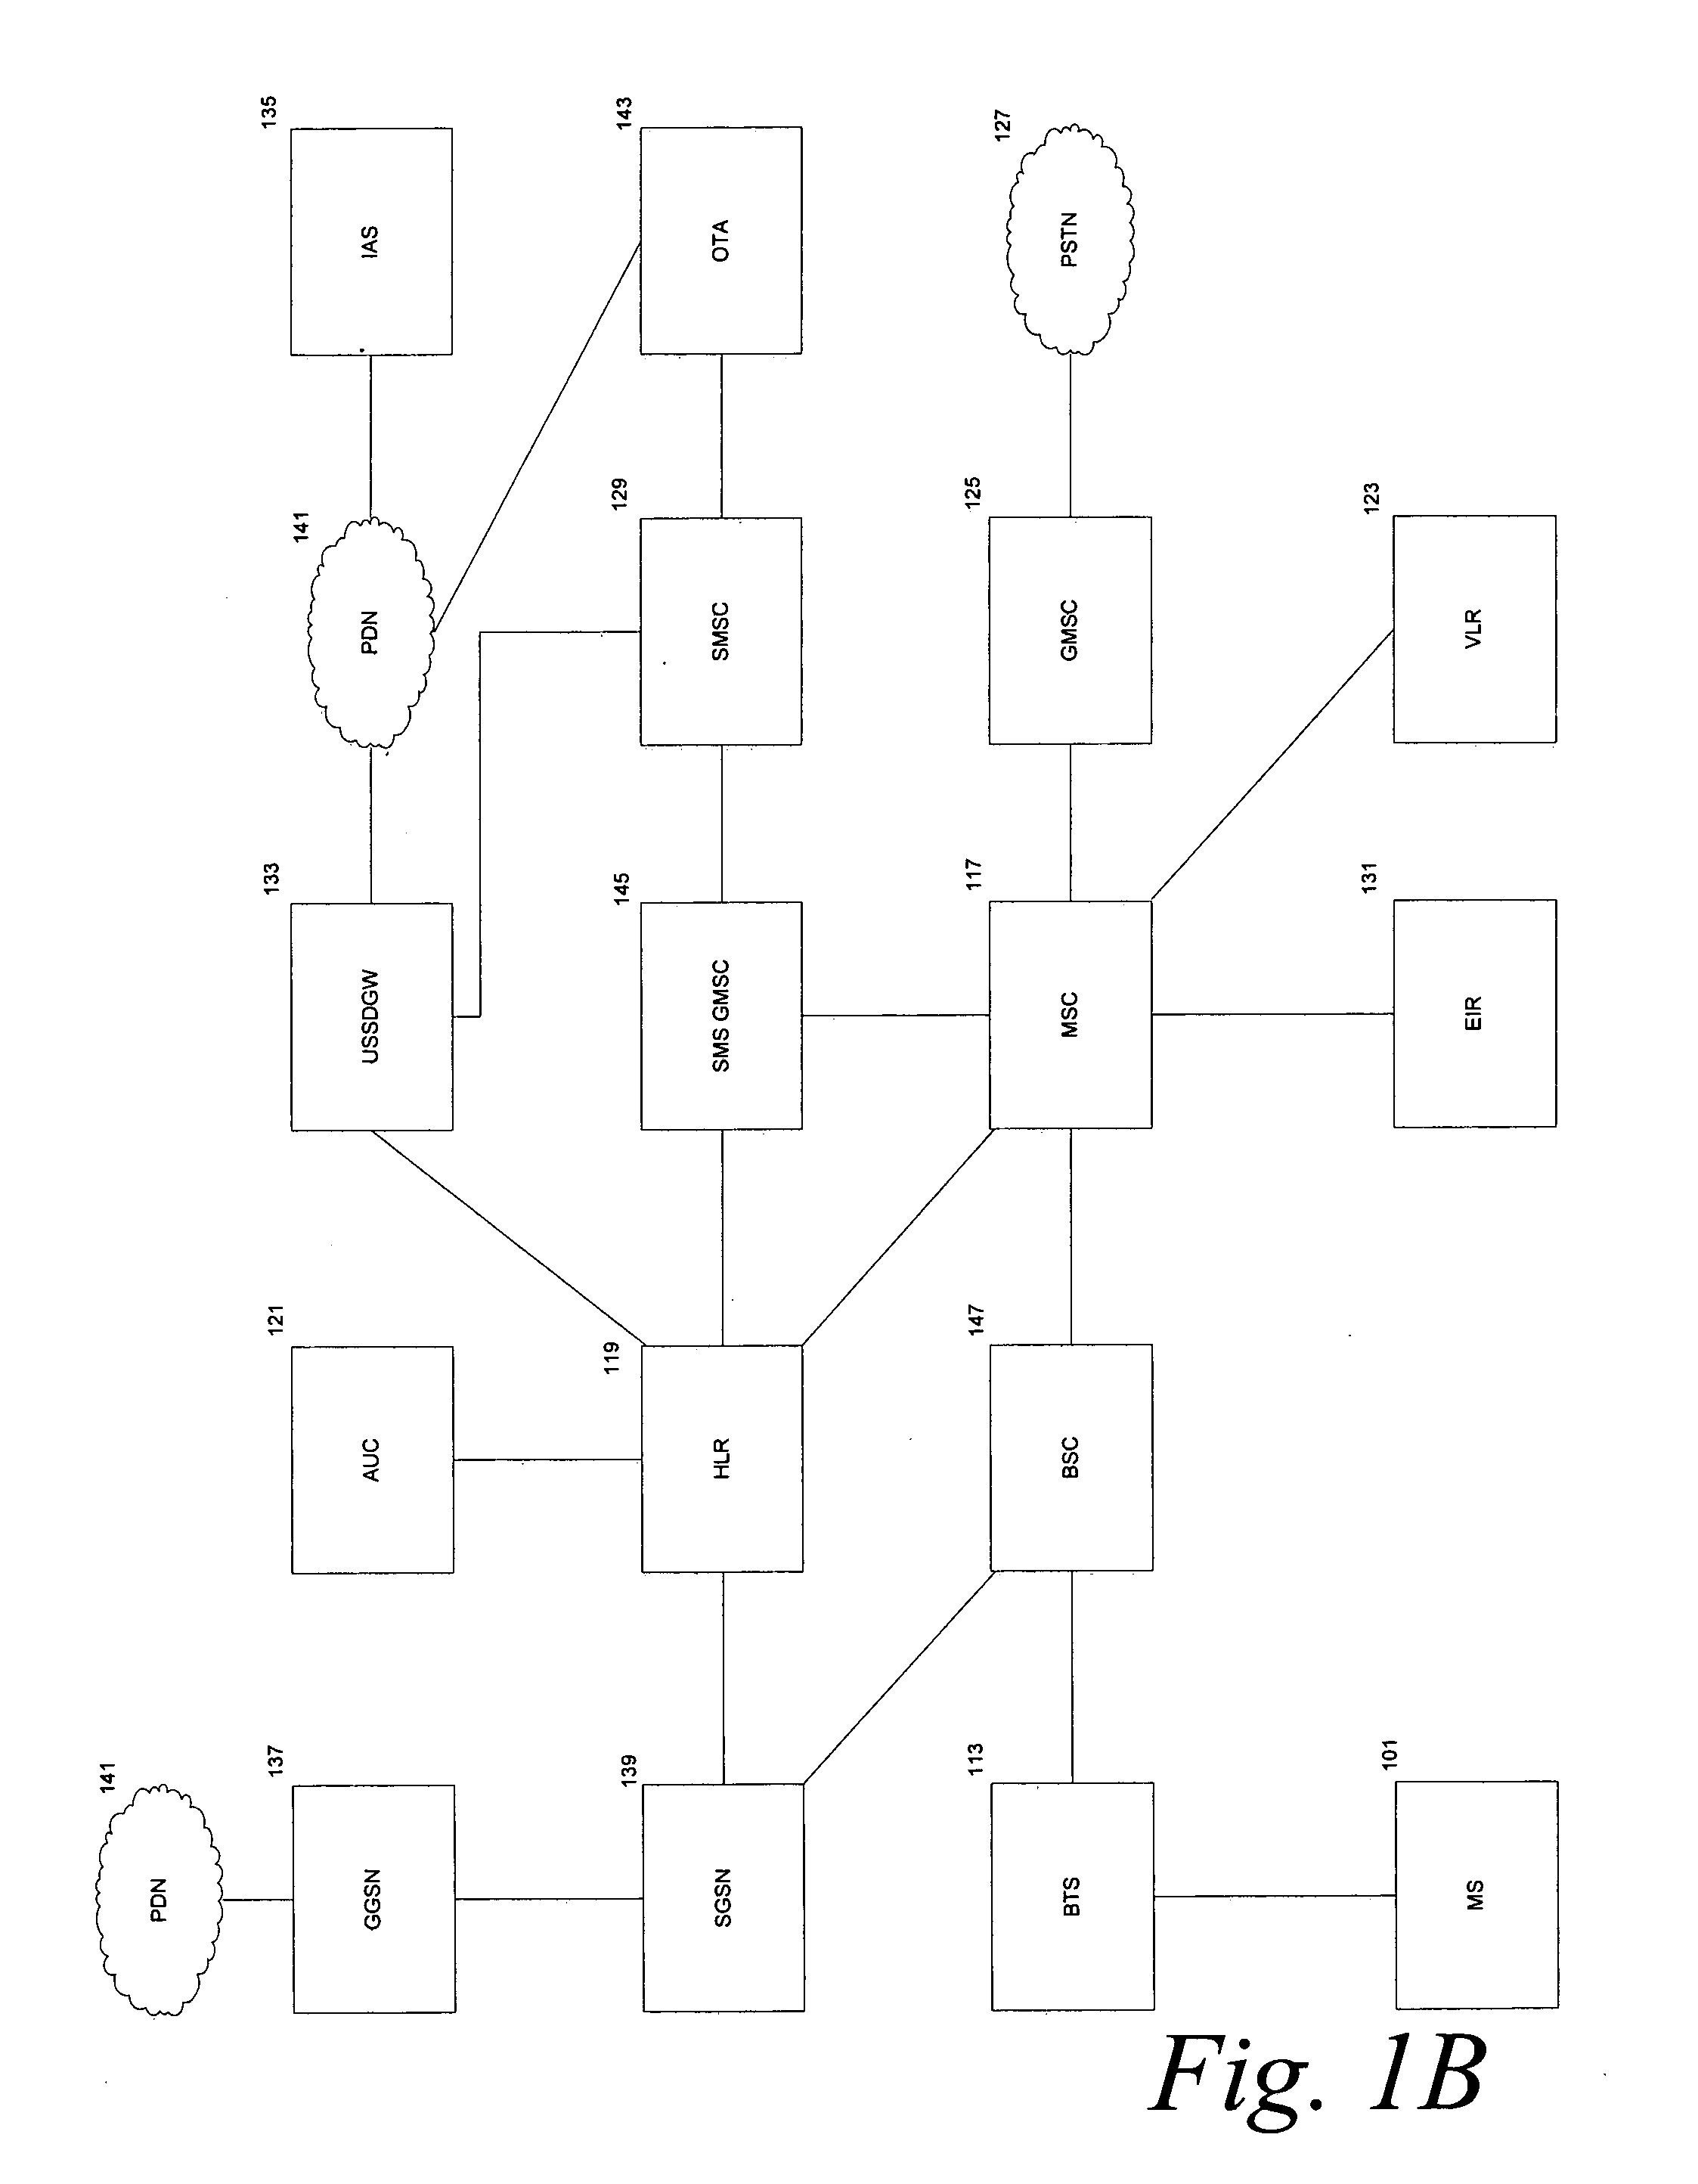 Methods and Apparatus for a SIM-Based Firewall